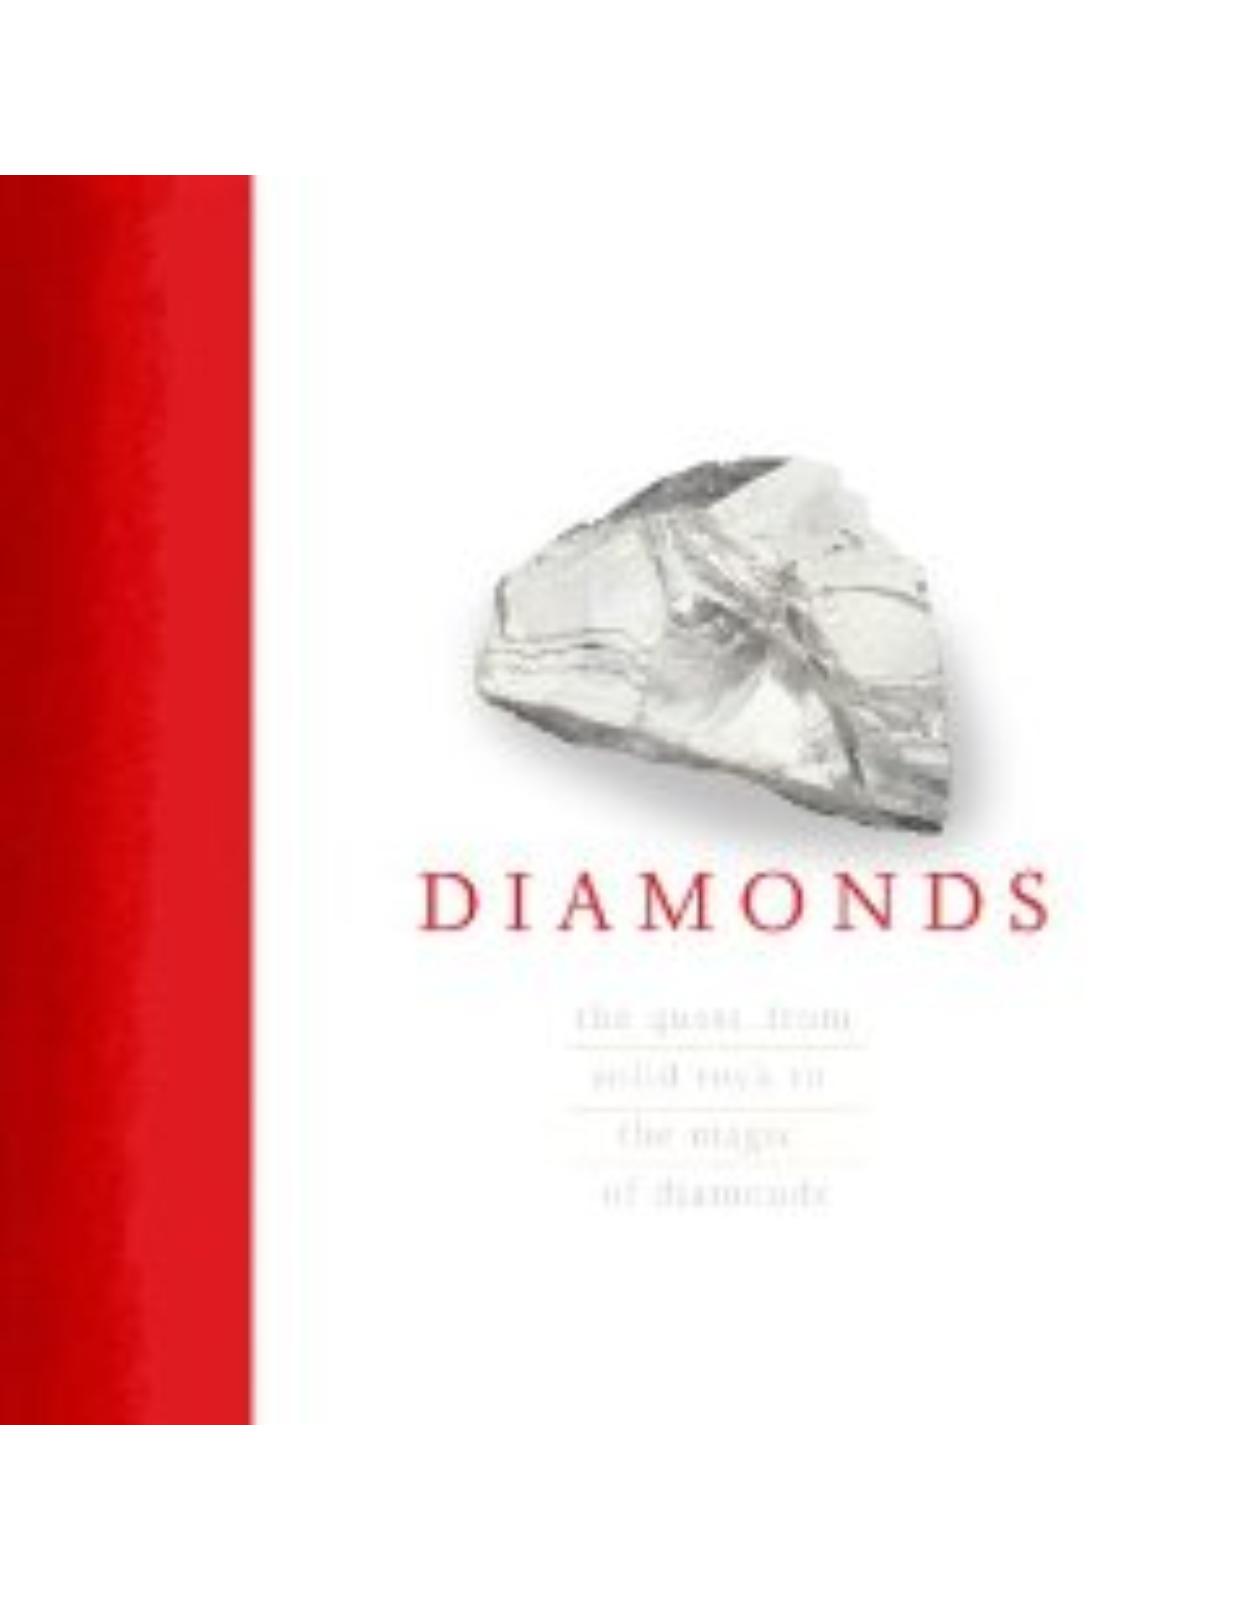 Diamonds: The Quest from Solid Rock to the Magic of Diamonds